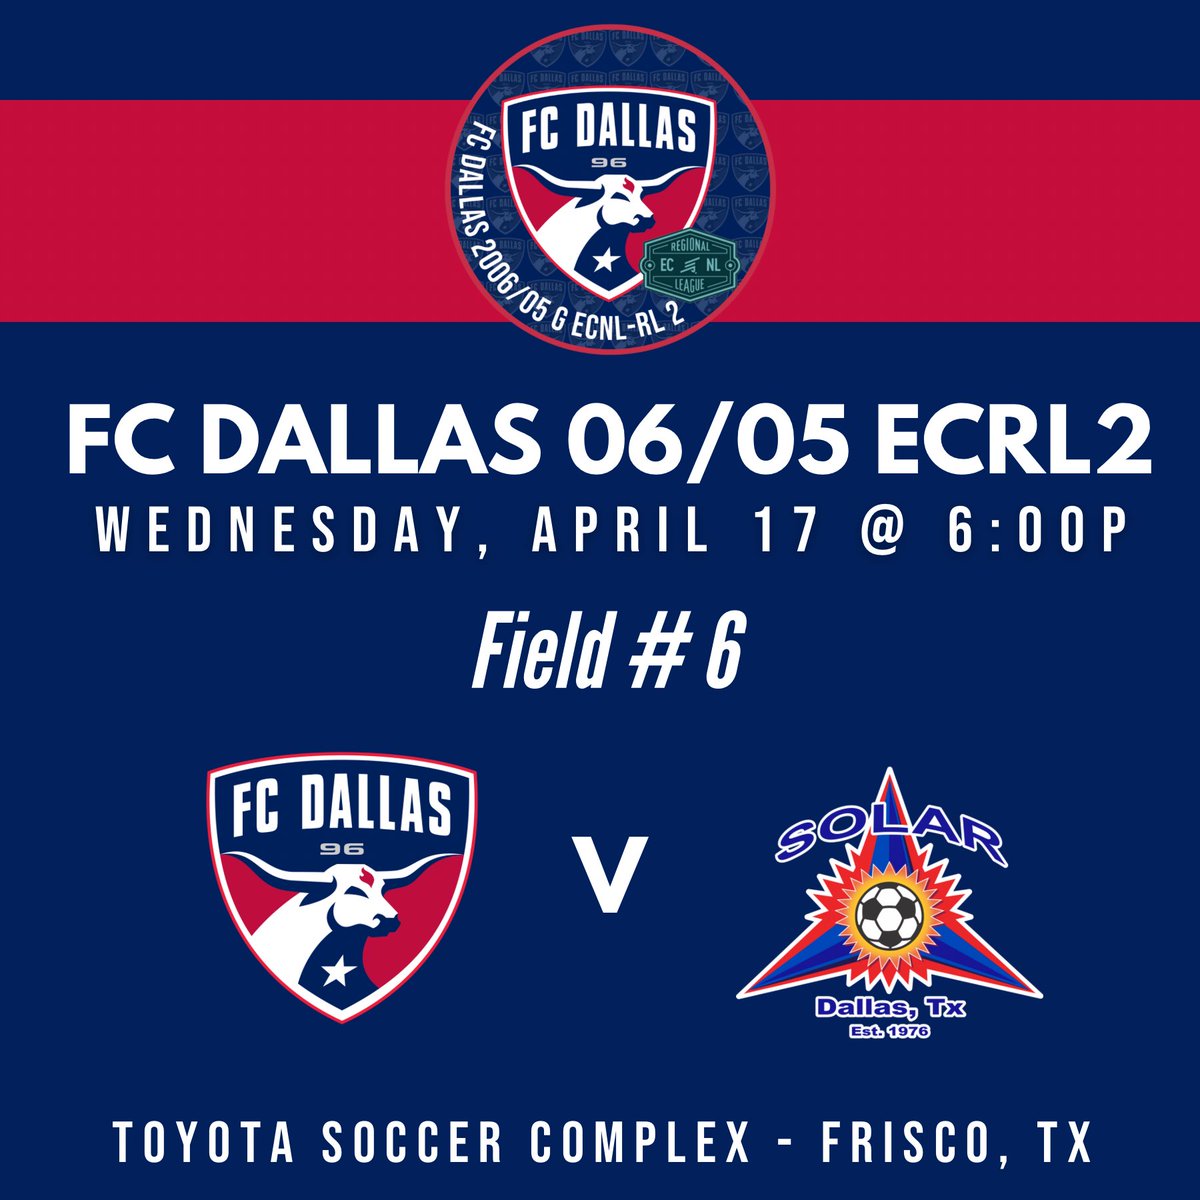 Another great matchup tomorrow vs Solar 06/05 ECRL‼️ ⚽️🏆 Always look forward to matching up with other top clubs in NTX 💪🏼@FCDwomen💙 #DTID